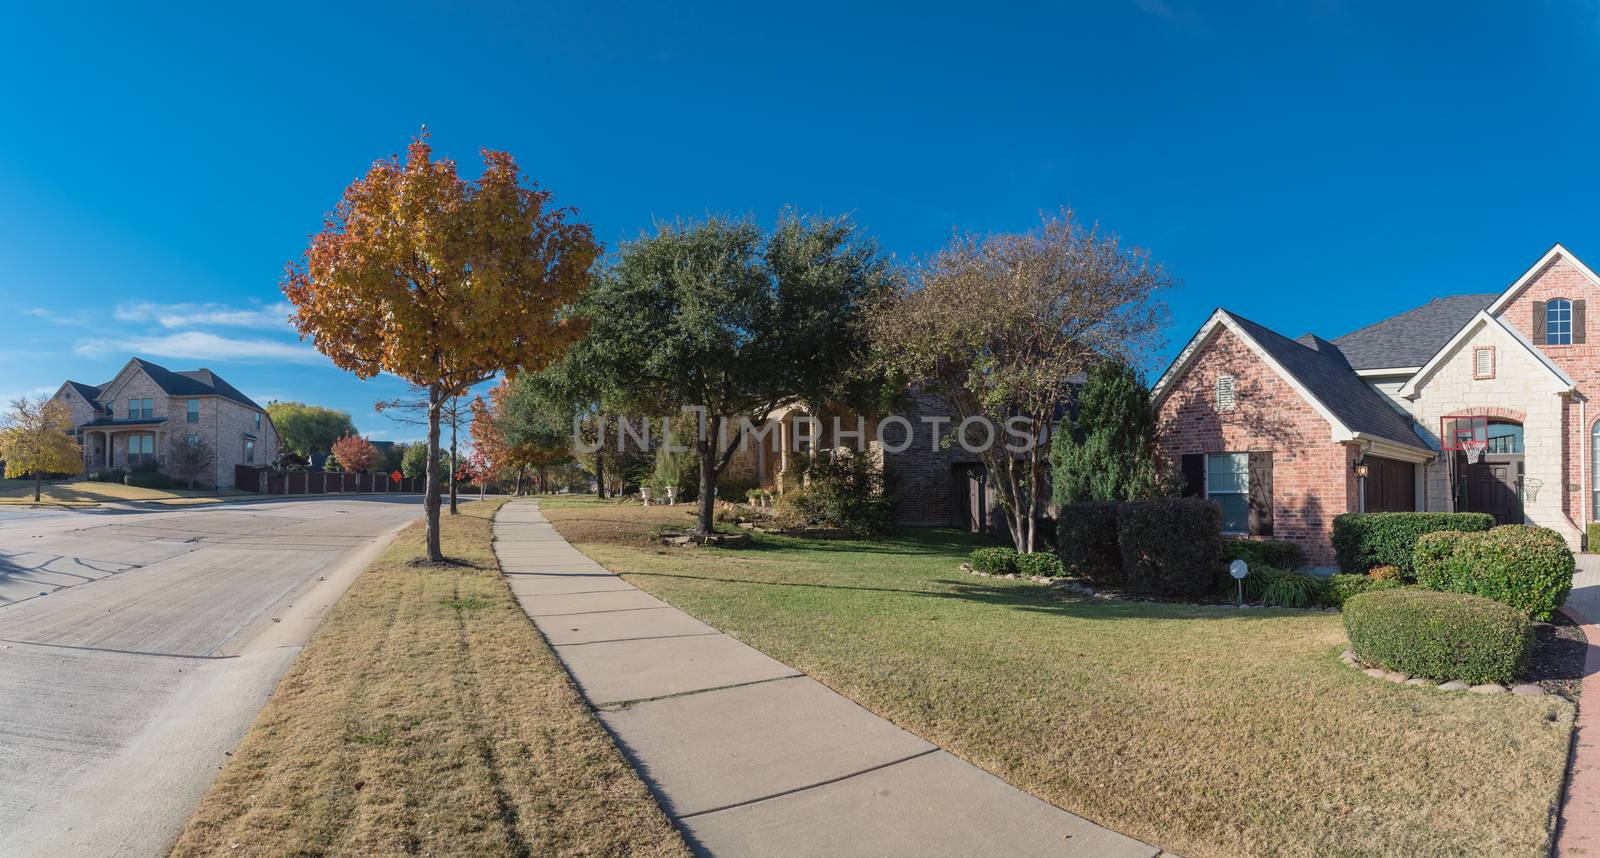 Panorama view typical sidewalk pathway in residential neighborhood suburban Dallas, Texas, America in autumn with colorful fall foliage. Quiet street in new development subdivision.